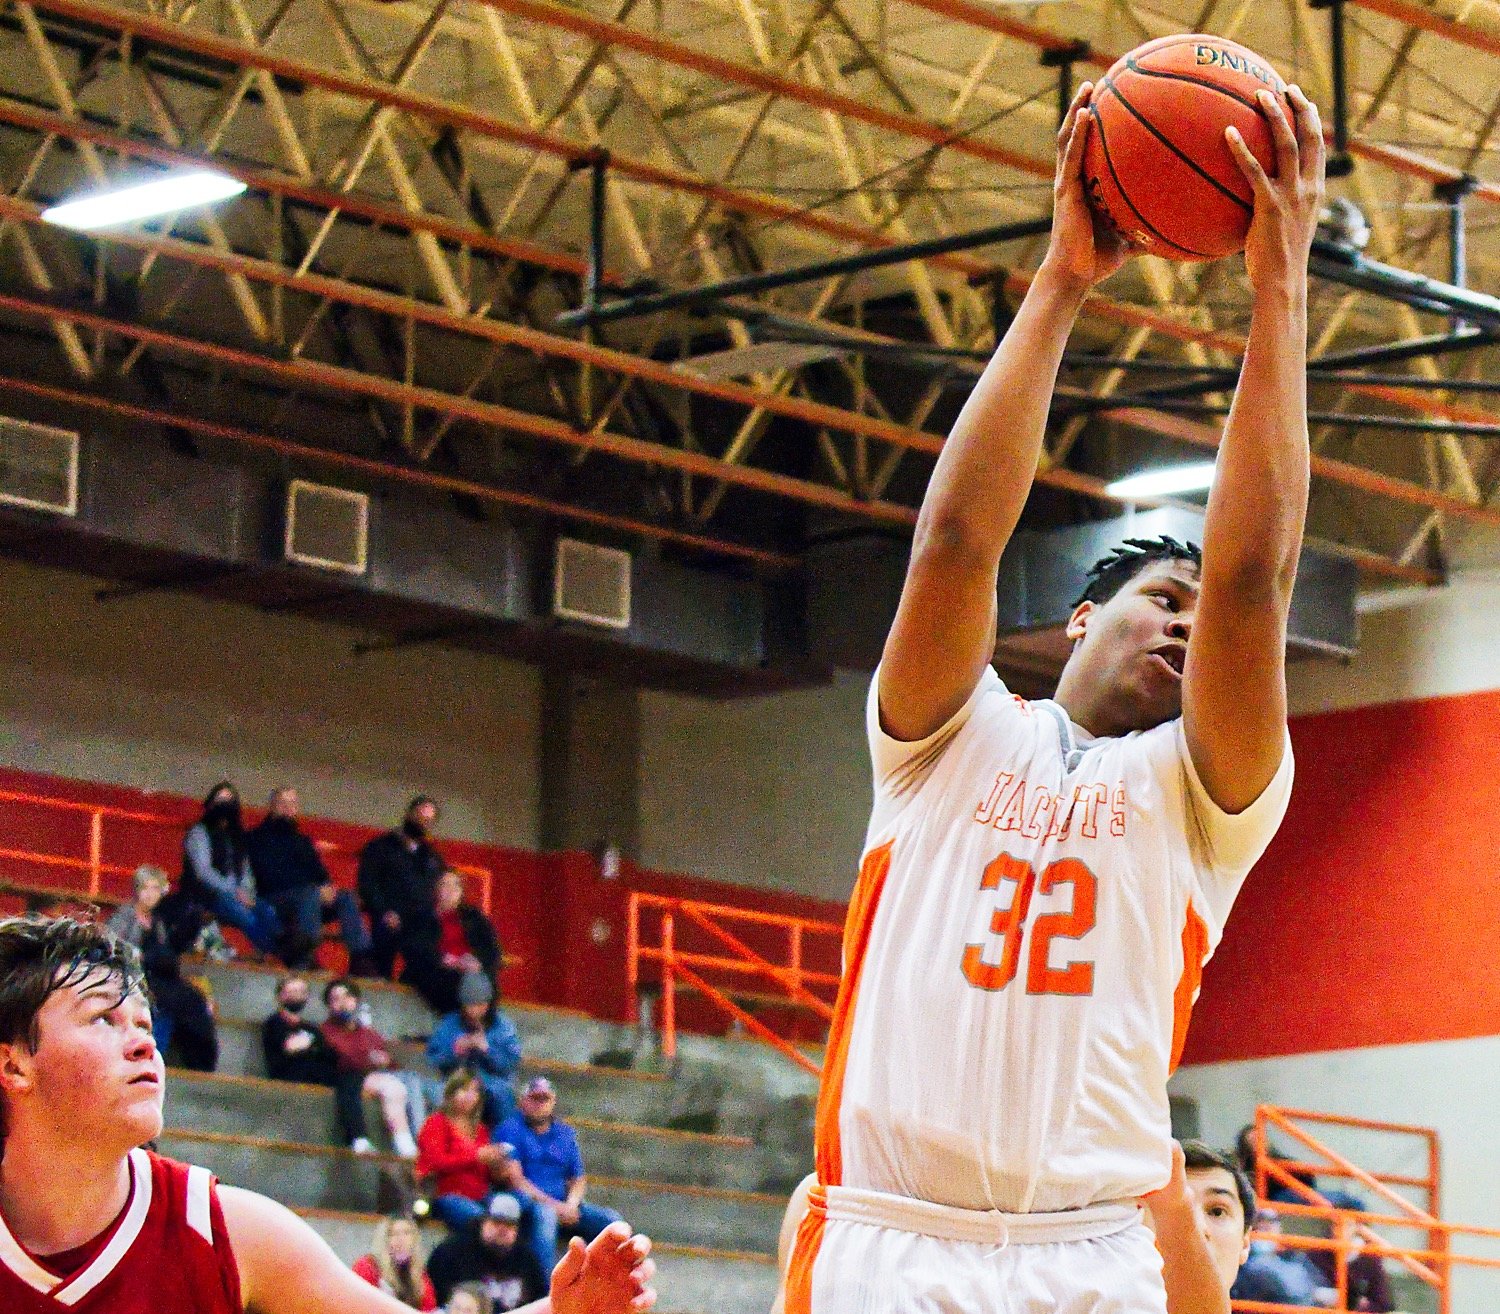 Stephen Ogueri (32) snags the rebound for Mineola in the Yellow jackets’ 100-36 win over Harmony.